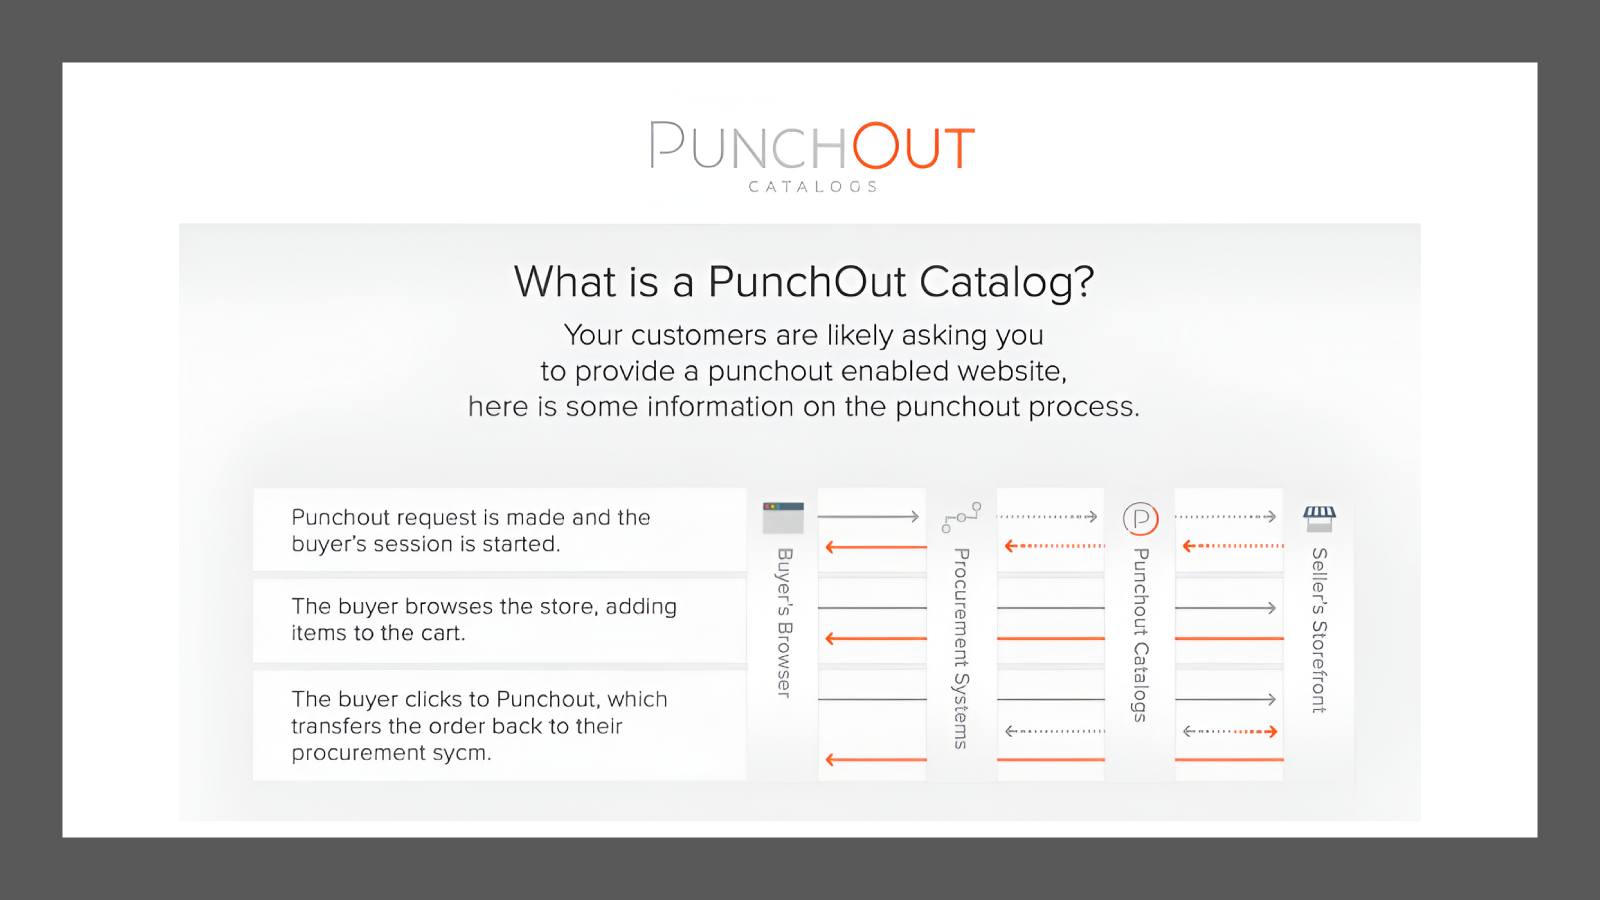 What is a Punchout Catalog?